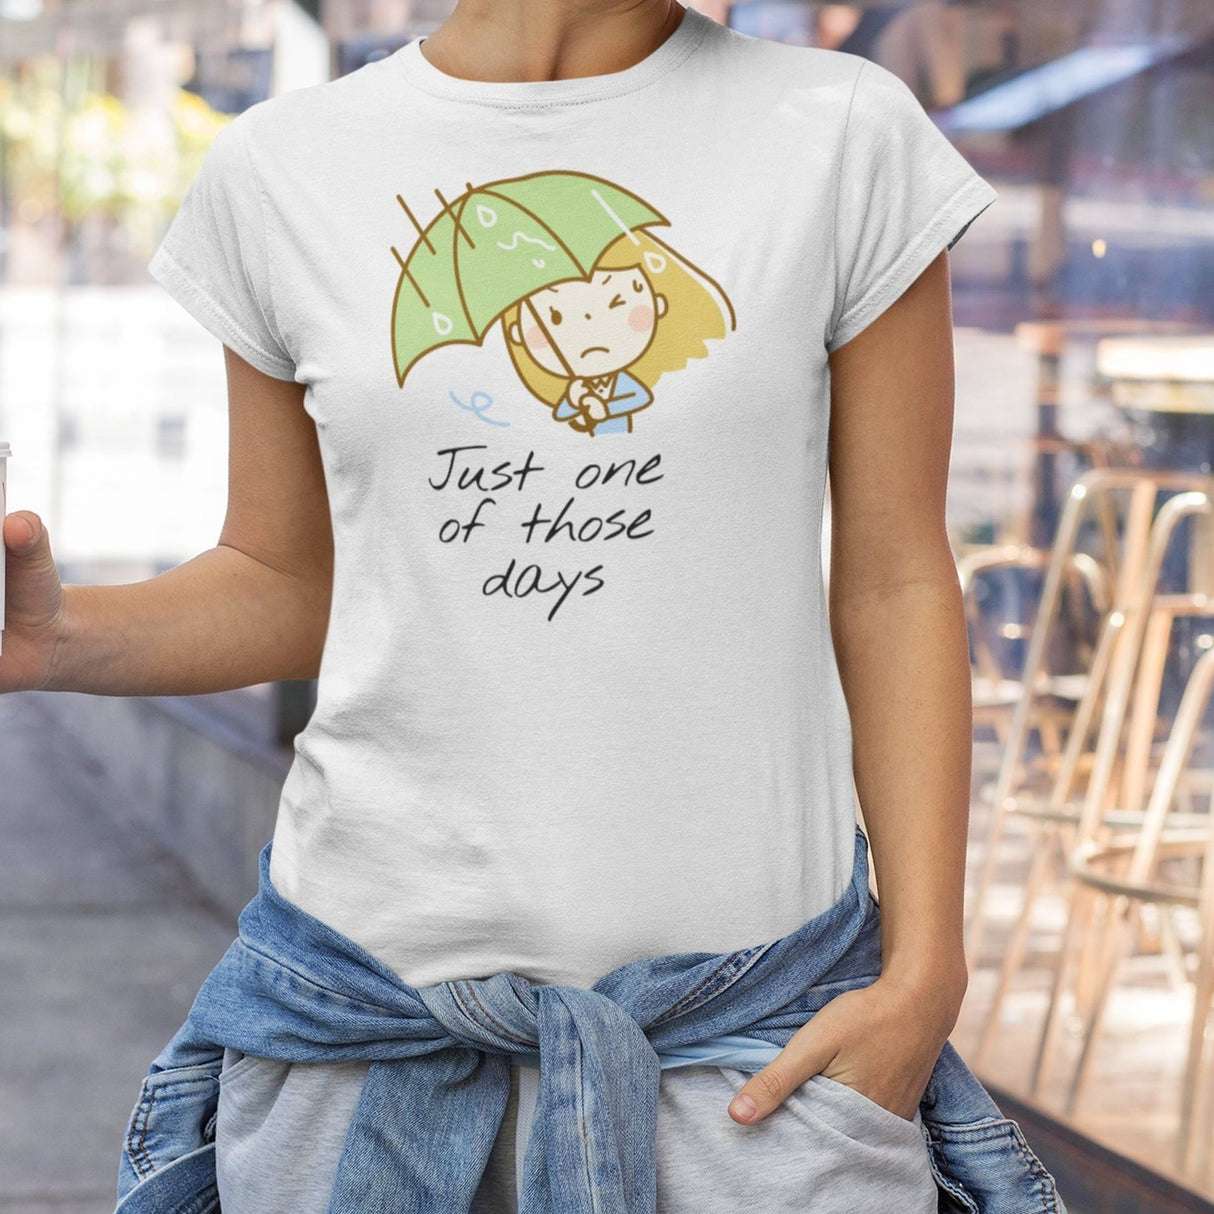 just-one-of-those-days-one-of-those-days-tee-funny-t-shirt-life-tee-truth-t-shirt-ladies-tee#color_white